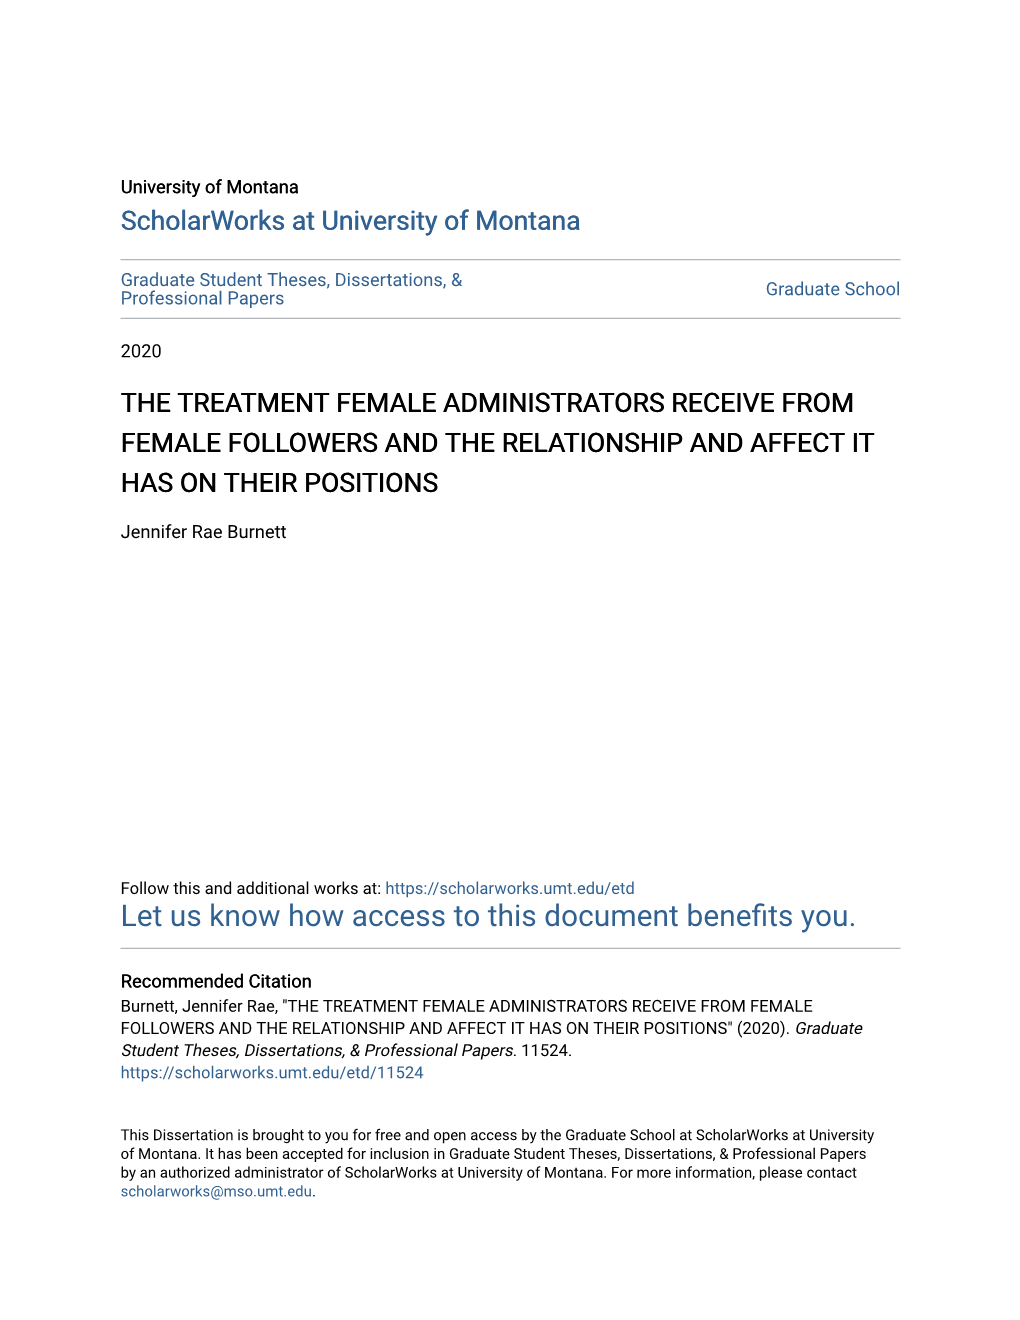 The Treatment Female Administrators Receive from Female Followers and the Relationship and Affect It Has on Their Positions